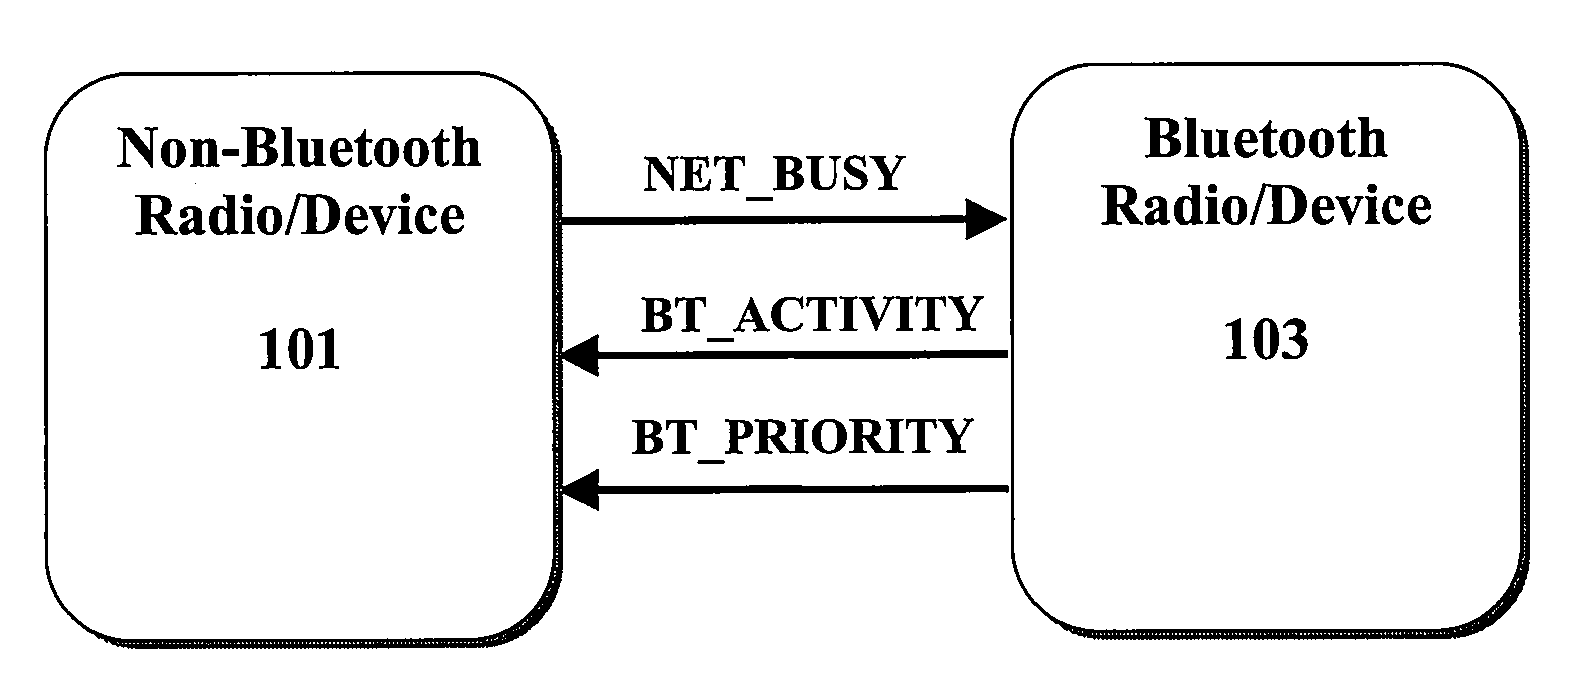 System and method for improving bluetooth performance in the presence of a coexistent, non-bluetooth, wireless device